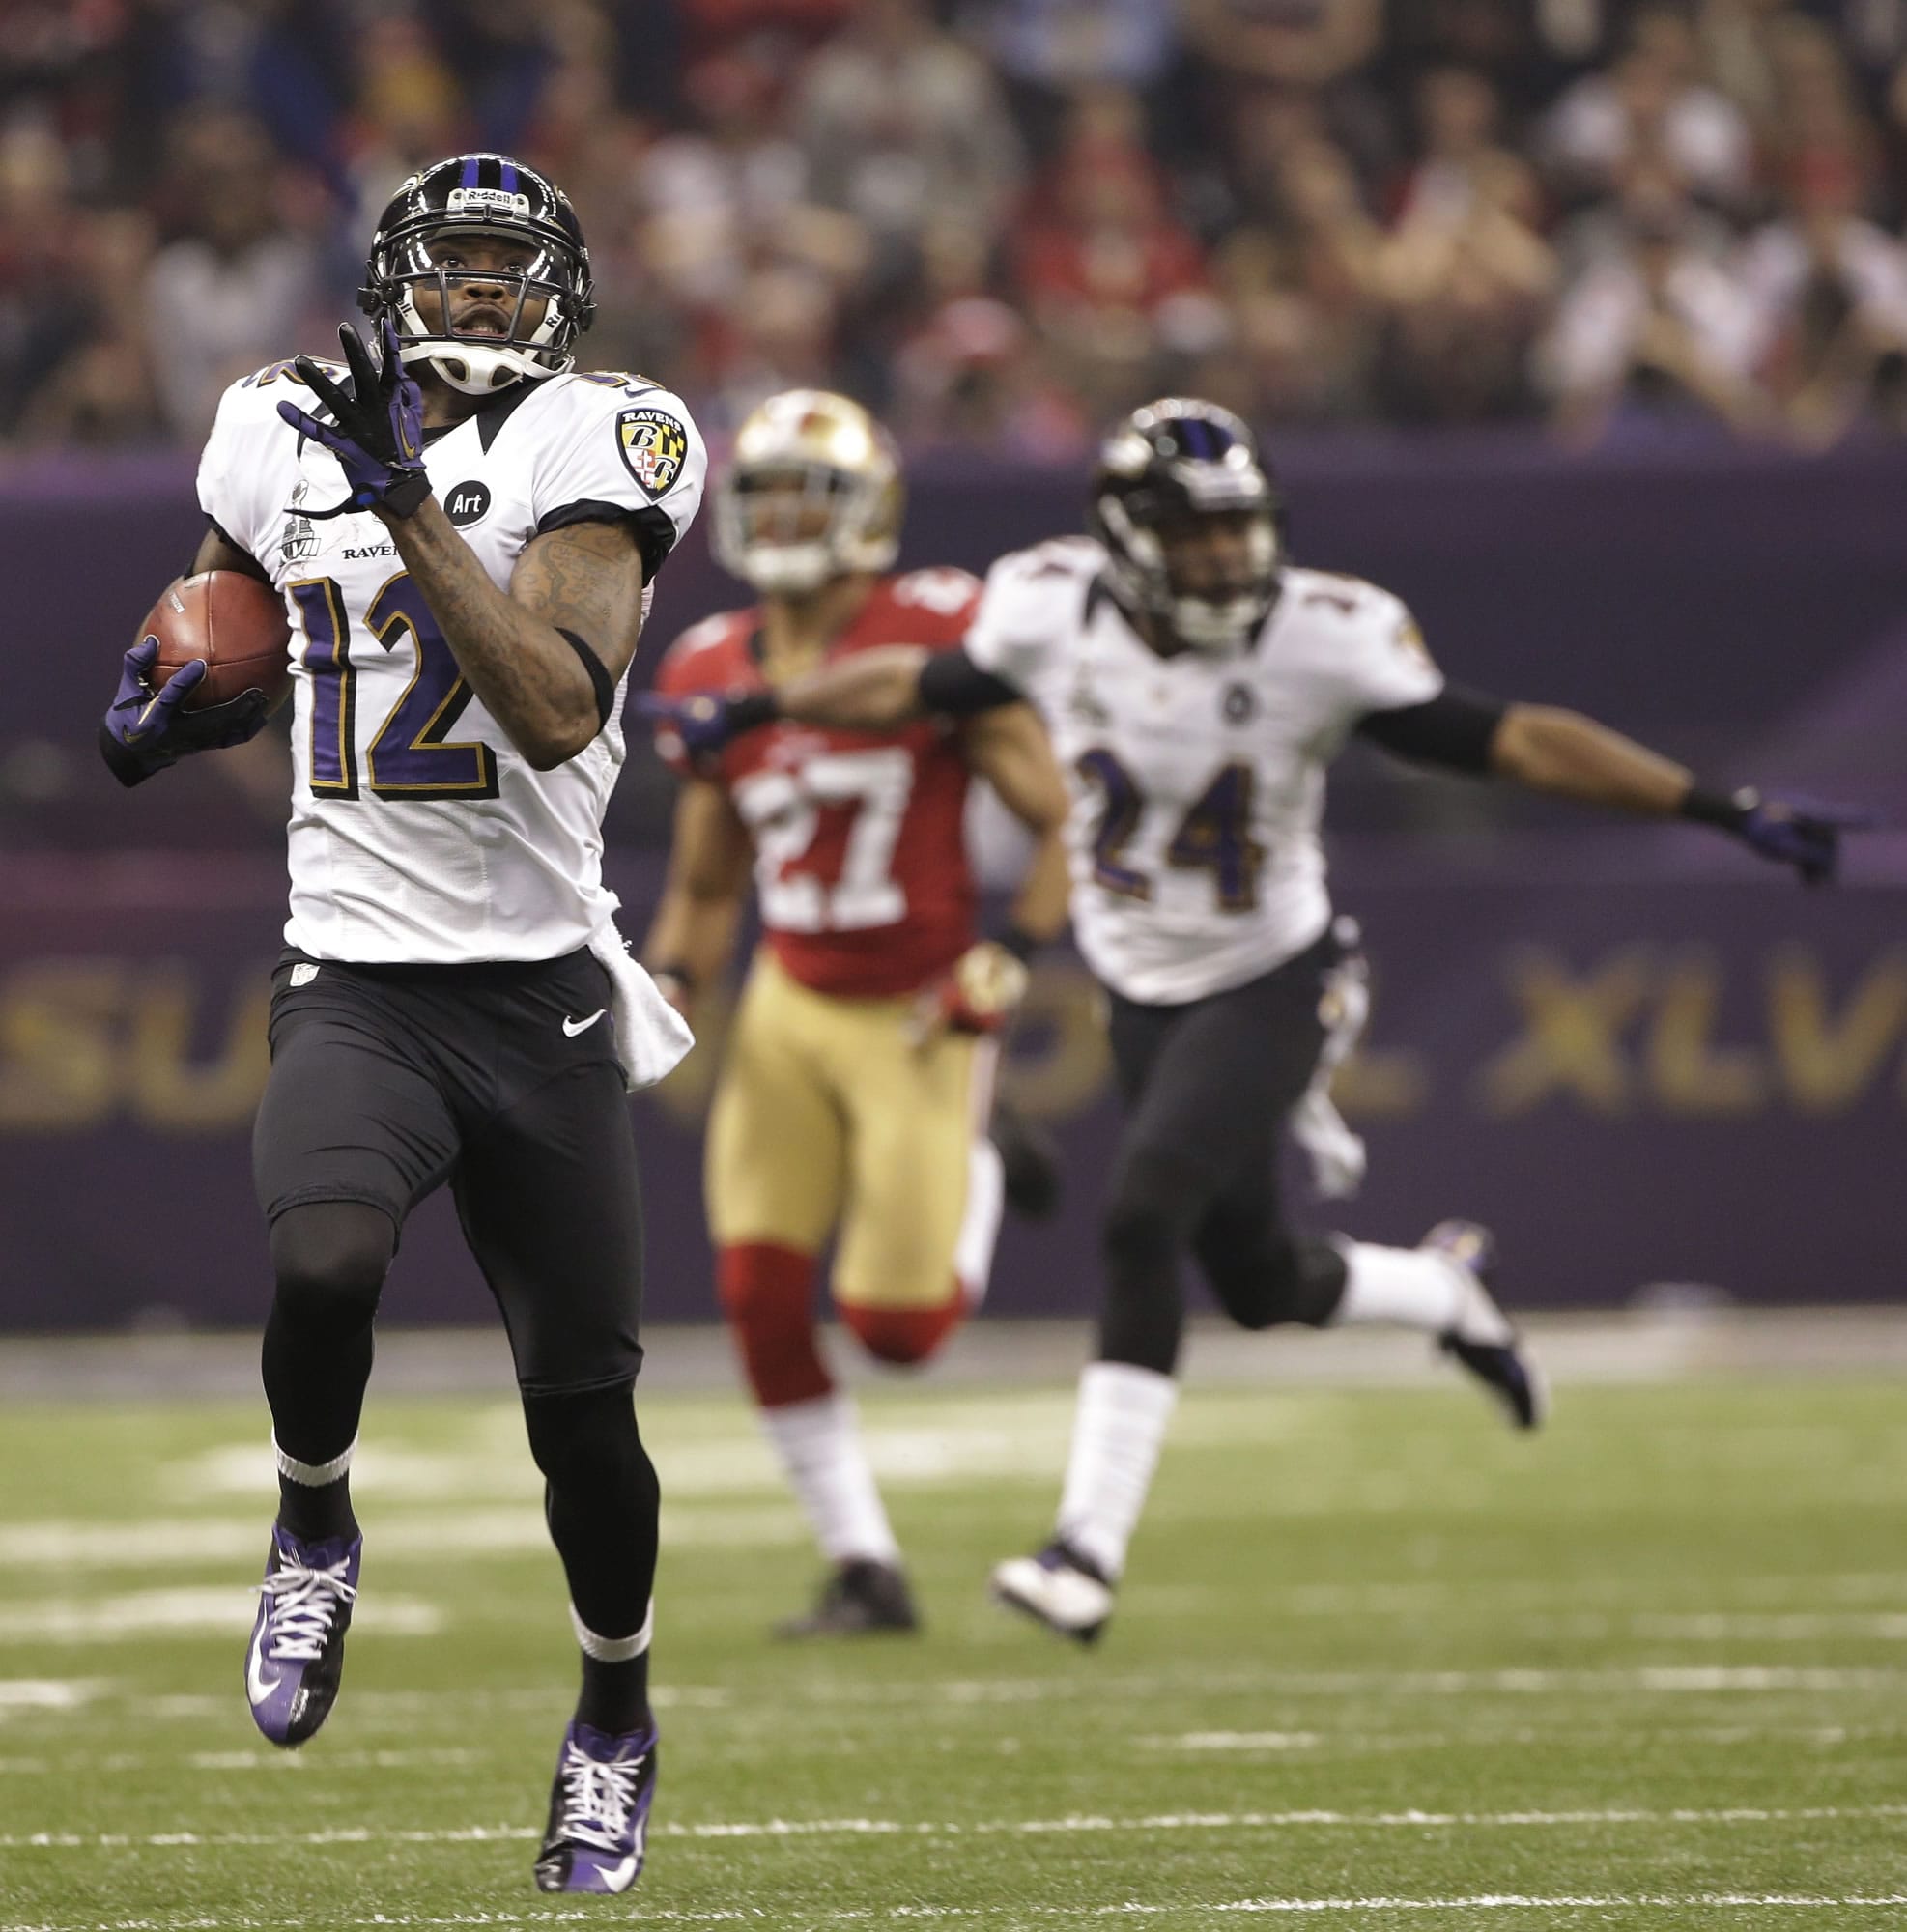 Baltimore's Jacoby Jones (12) takes the opening kickoff of the second half 108 yards for a touchdown.